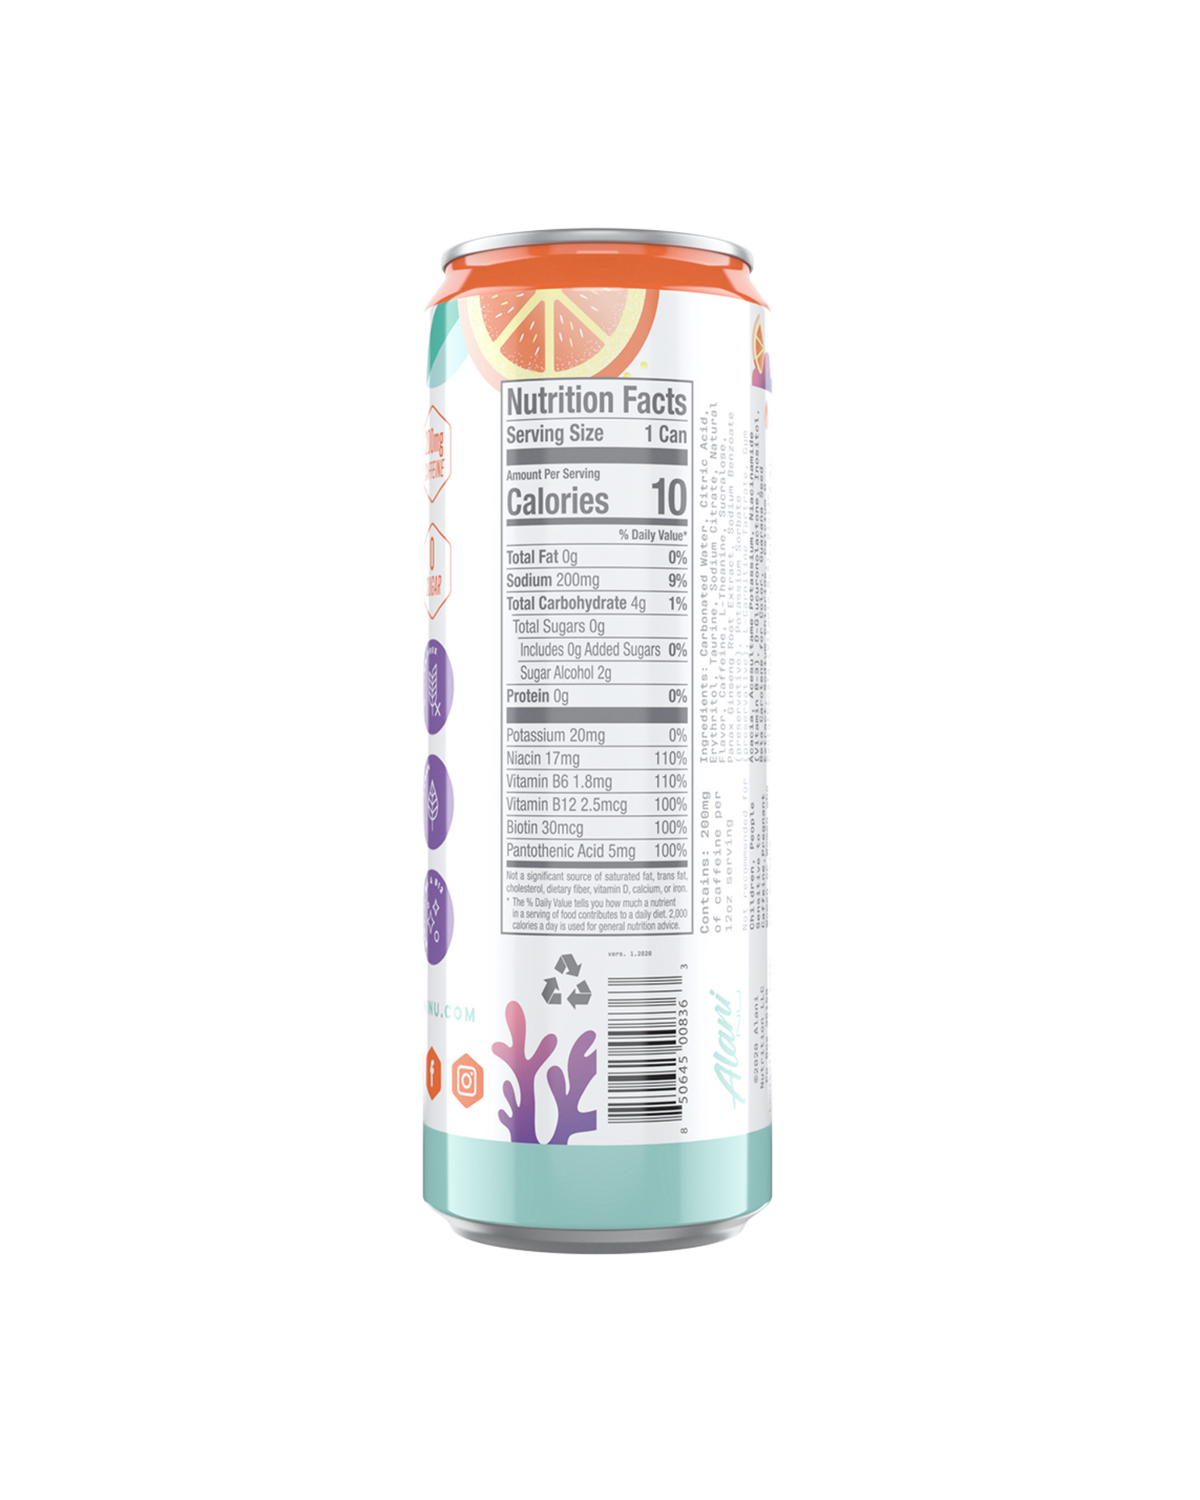 A back view of Energy Drink in Mimosa flavor highlighting nutrition facts.